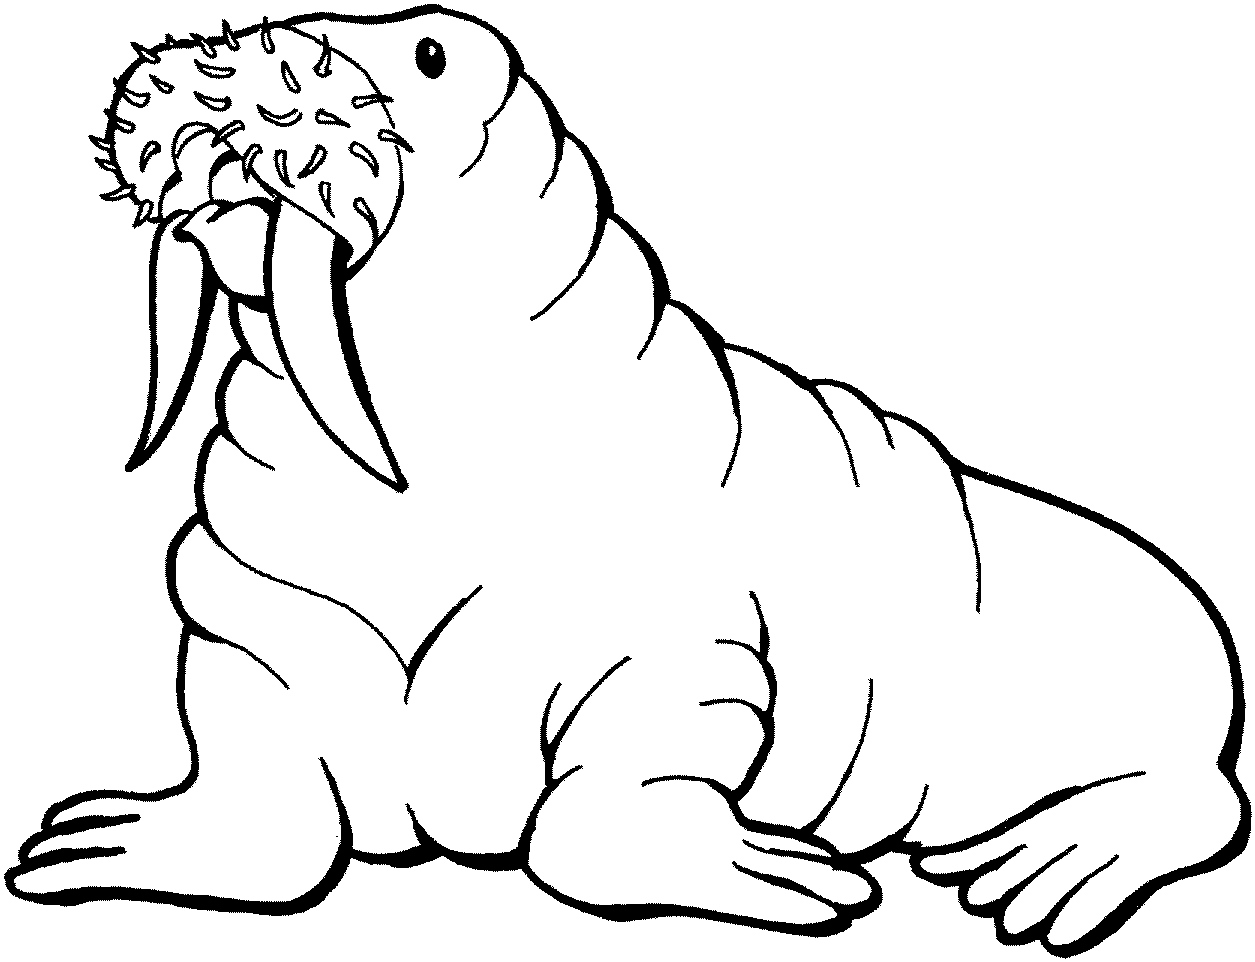 Walrus On Water Coloring Pages 8